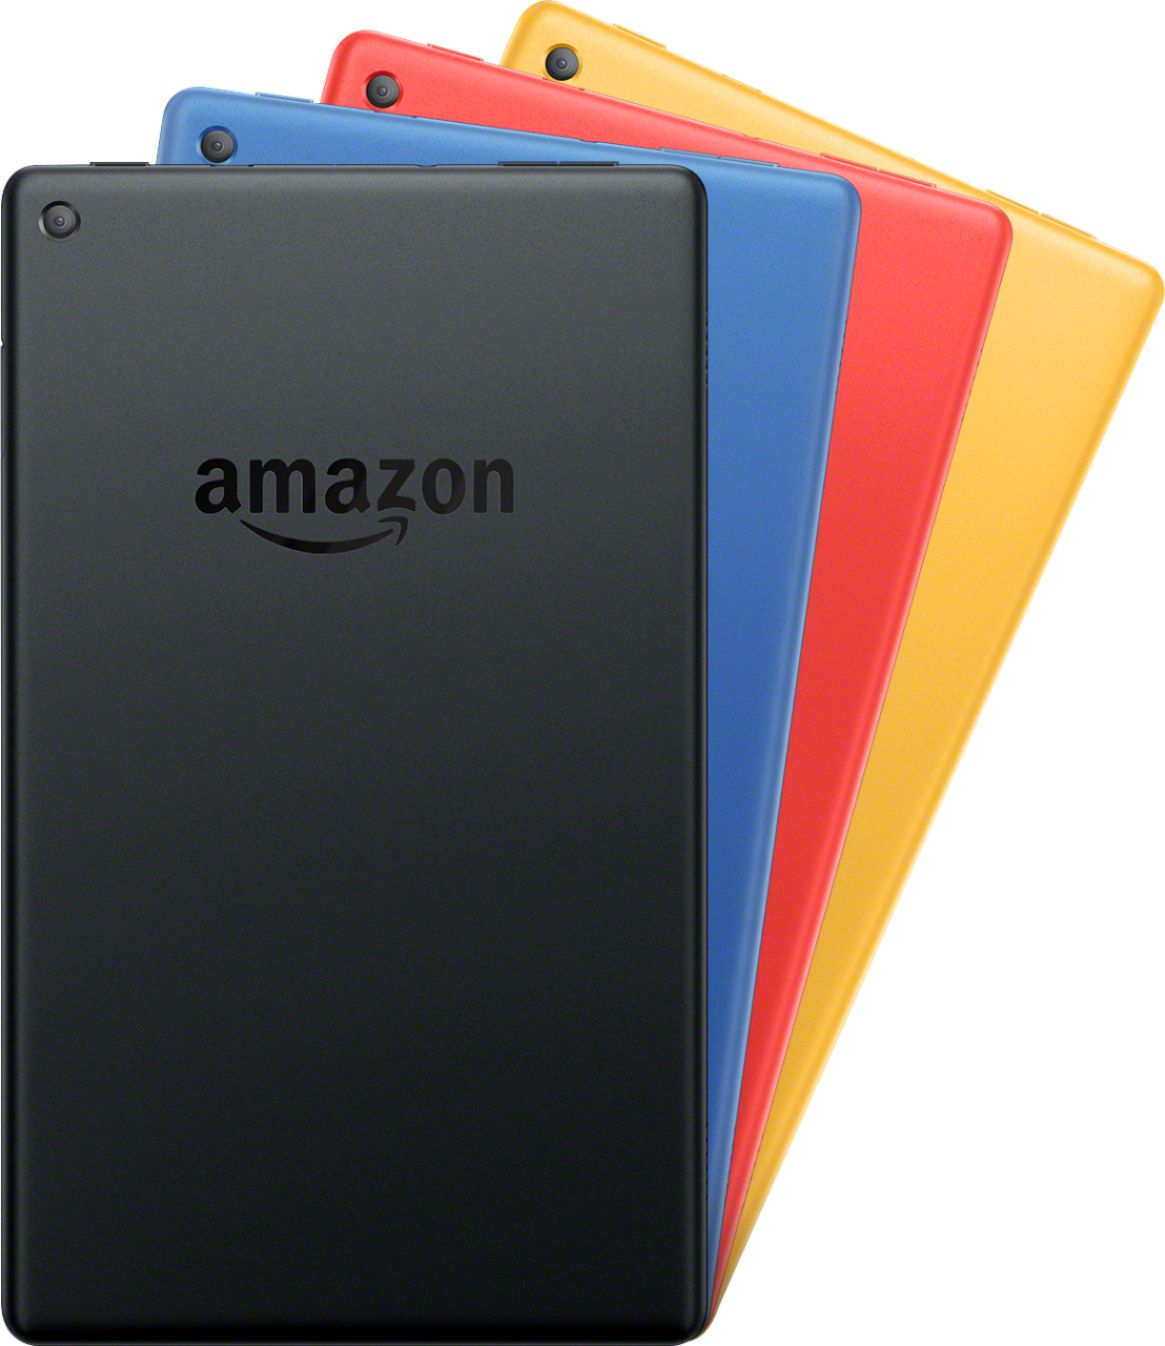 PC/タブレット タブレット Best Buy: Amazon Fire HD 8 8